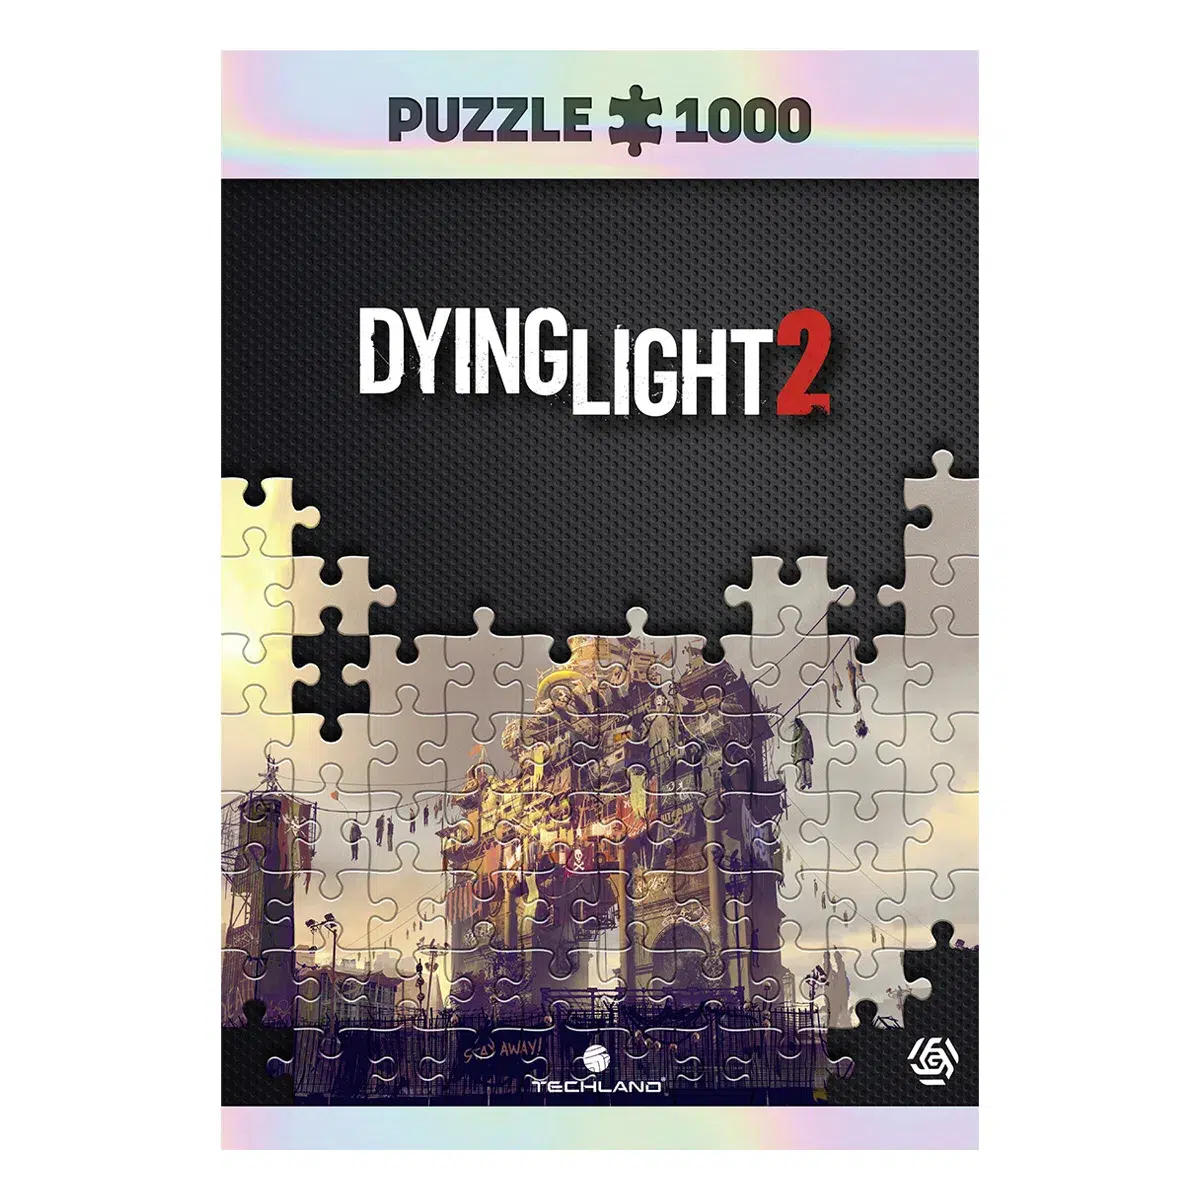 Dying Light 2 Puzzle "Arch" (1000 pcs) Cover